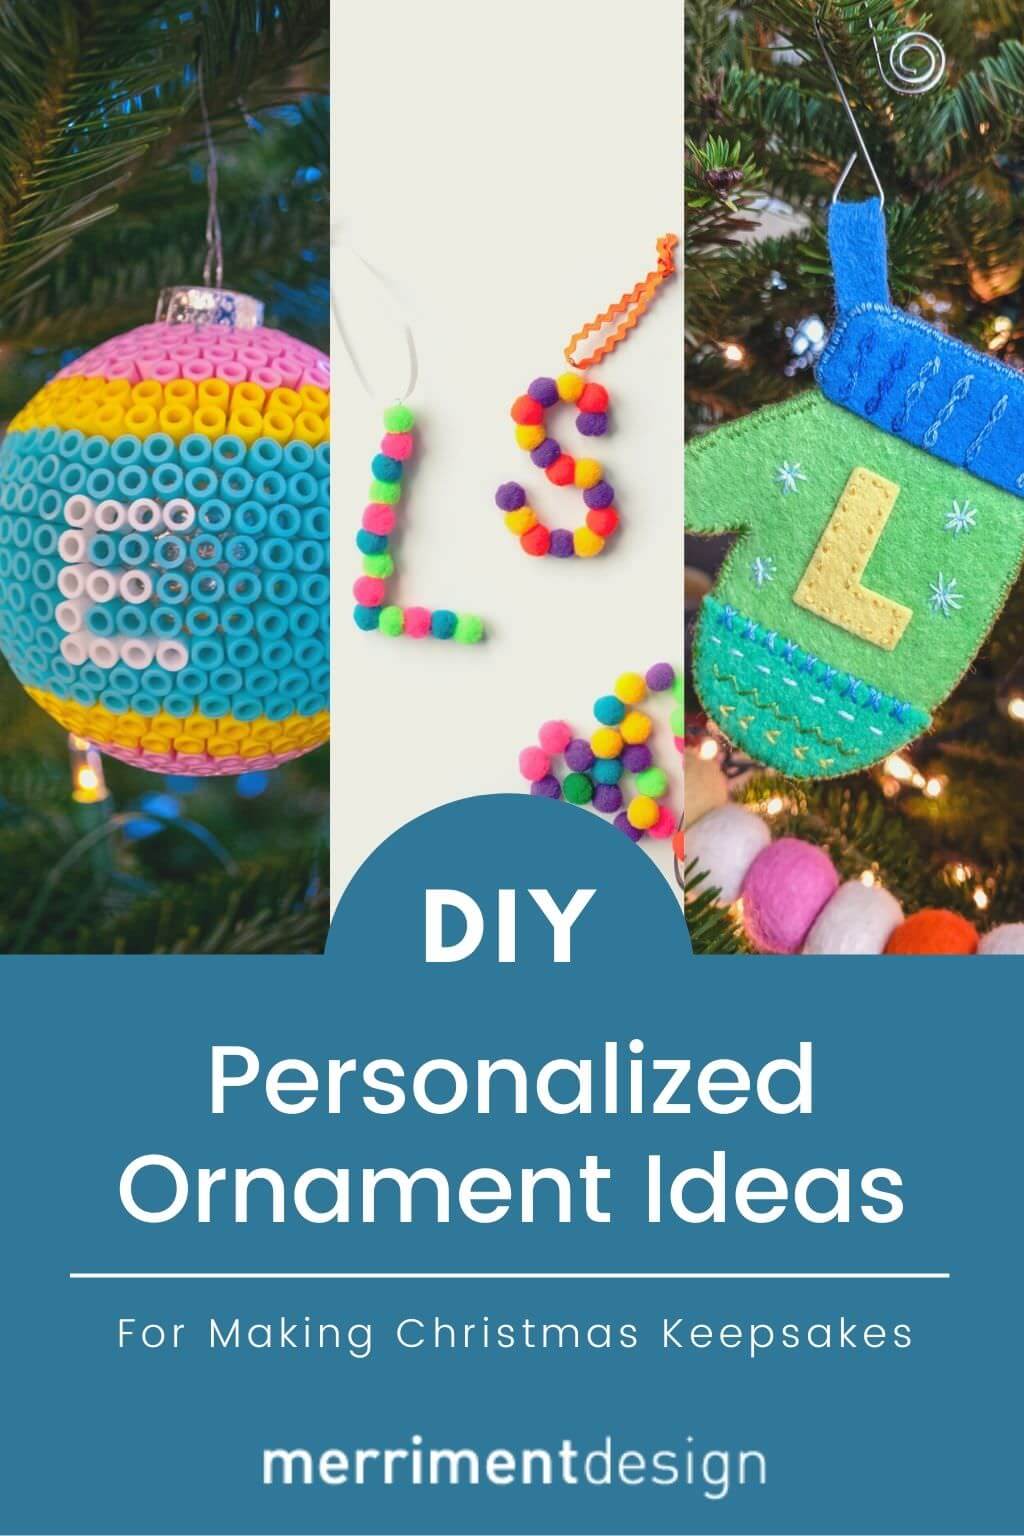 Personalized Christmas ornament ideas and DIY tutorials